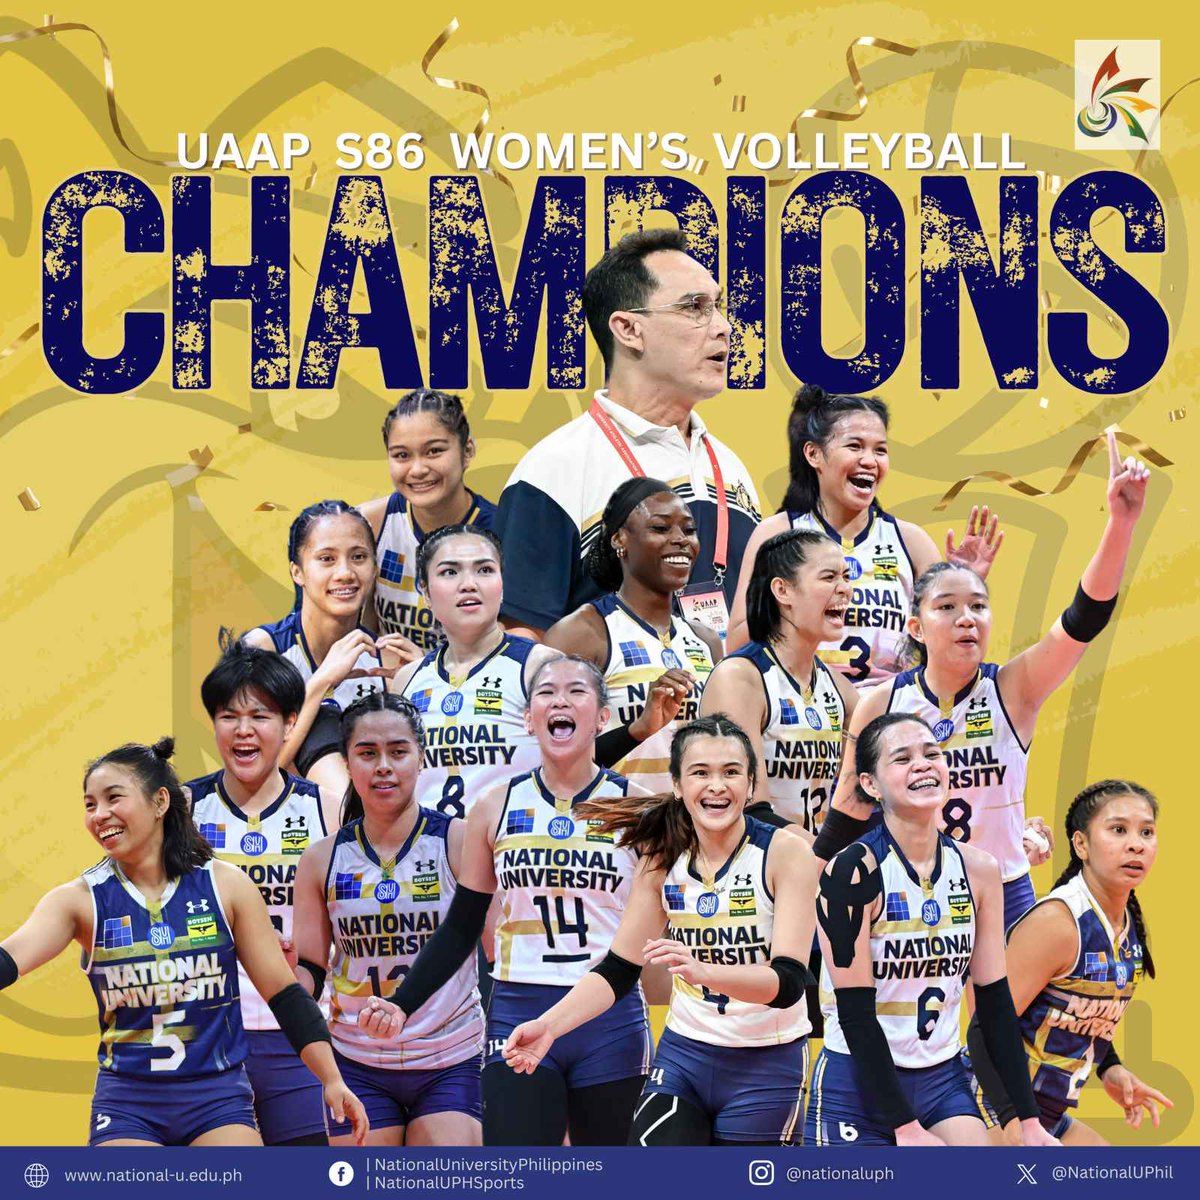 QUEENS OF UAAP VOLLEYBALL! 🏆💛💙  

The NU Lady Bulldogs sealed the Gold at the expense of UST, 25-23, 23-25, 27-25, 25-16, once again proving their dominance in the Women’s Volleyball today at the MOA Arena in Pasay.

📷: UAAP Media Bureau, James Lapuz
#GoBulldogs #UAAPSeason86